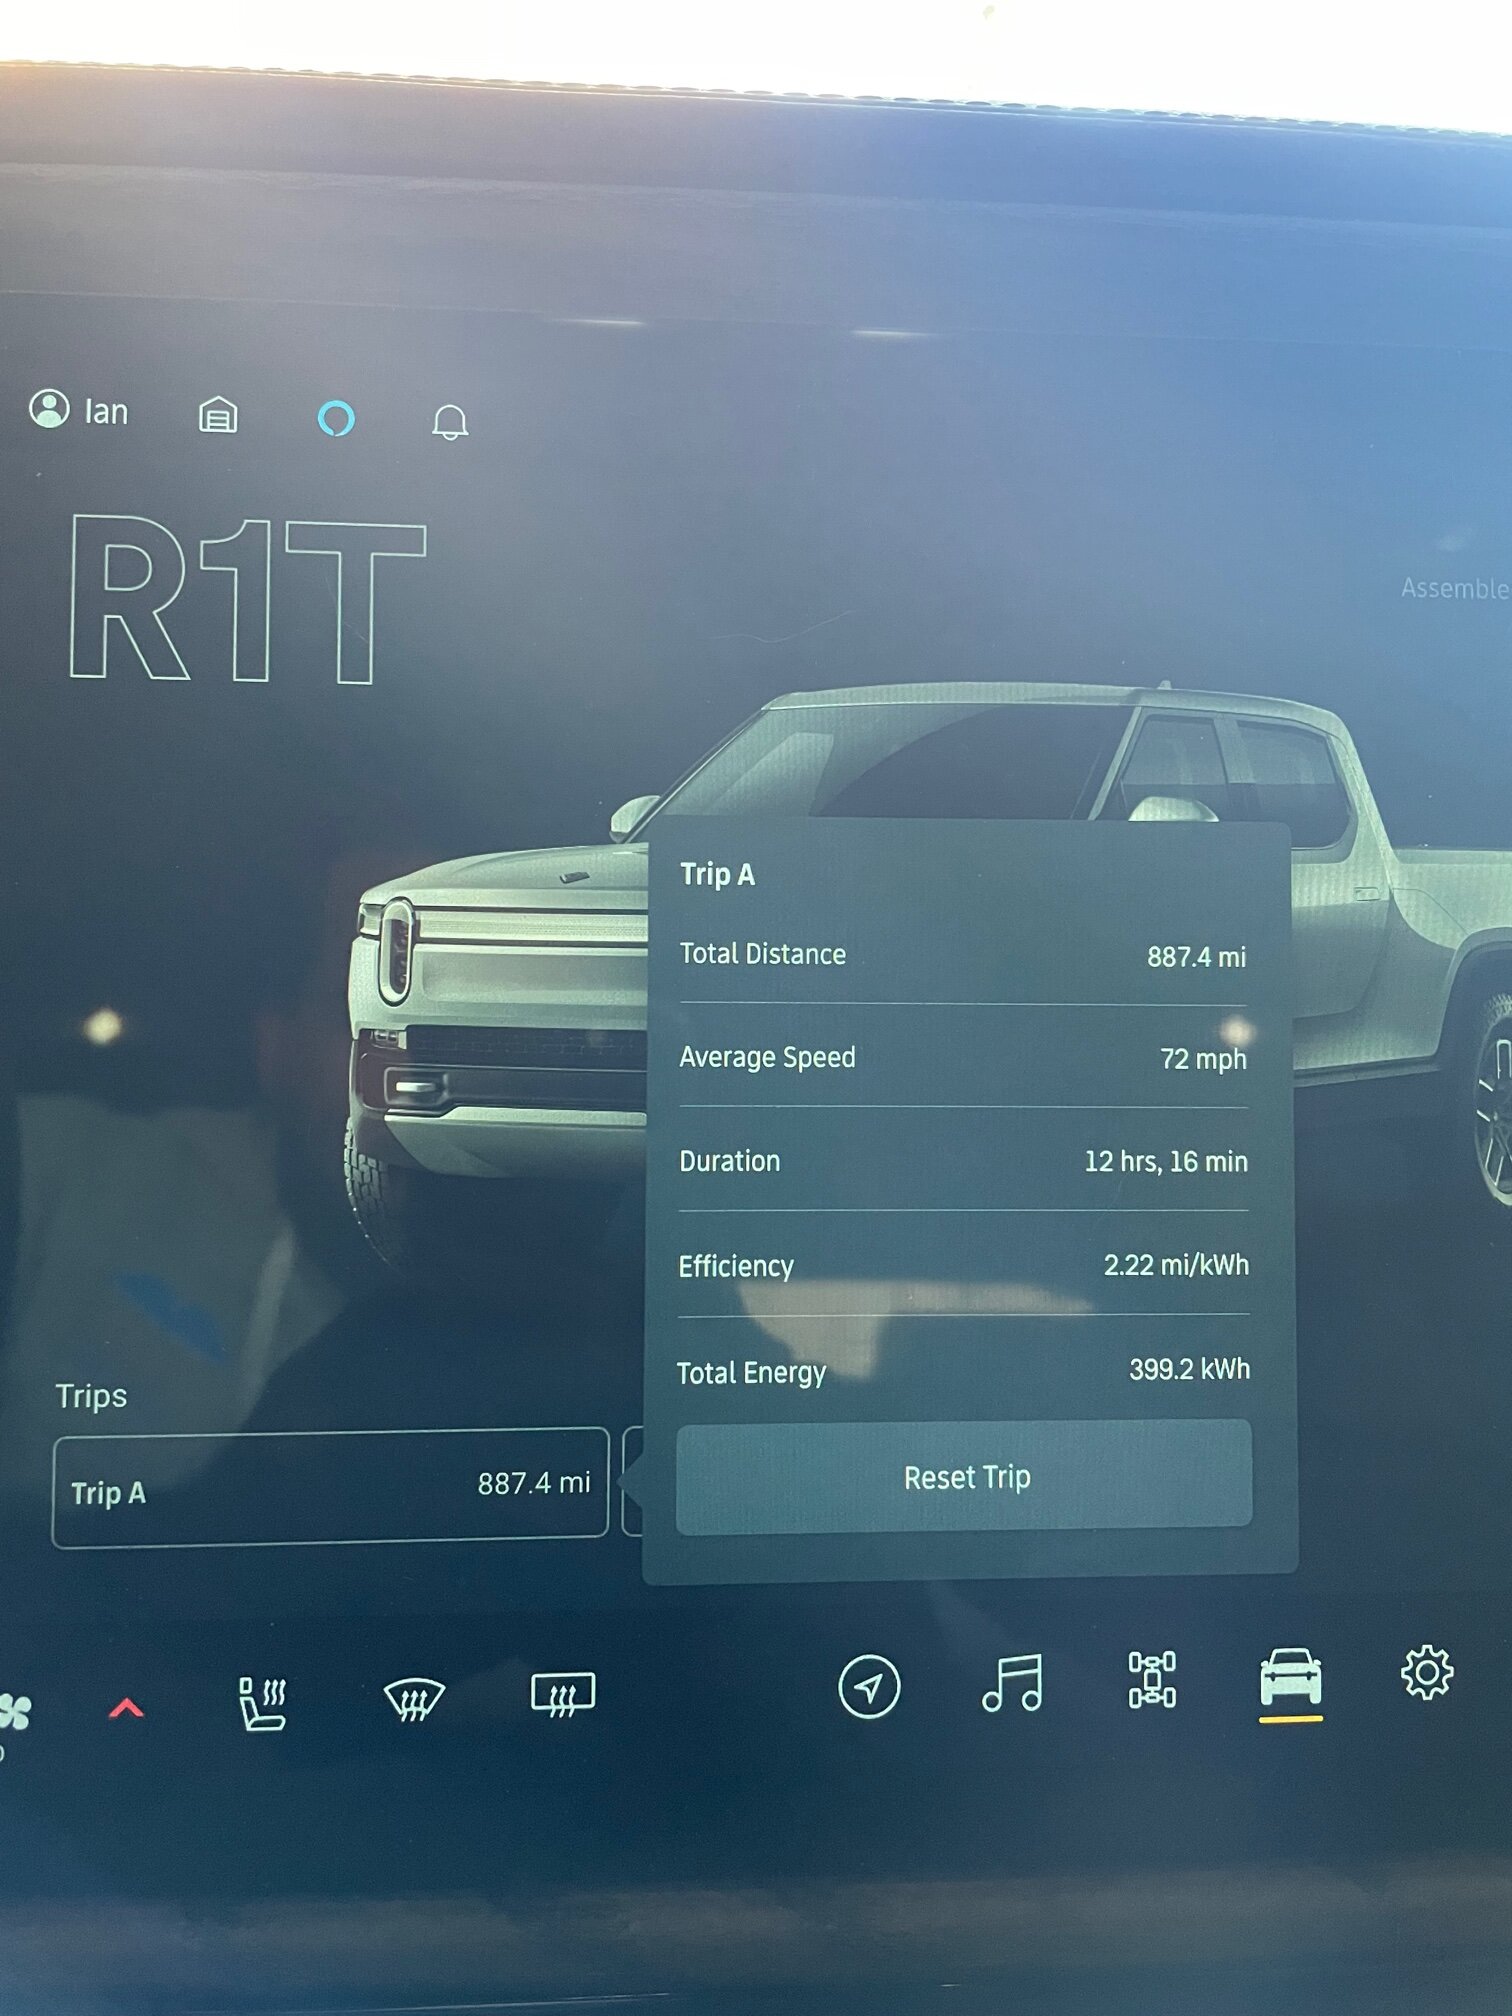 Rivian R1T R1S R1T's range is so impressive, even on 20" tires. Averaged 2.38 mi/kWh on 400 mile road trip IMG_9109